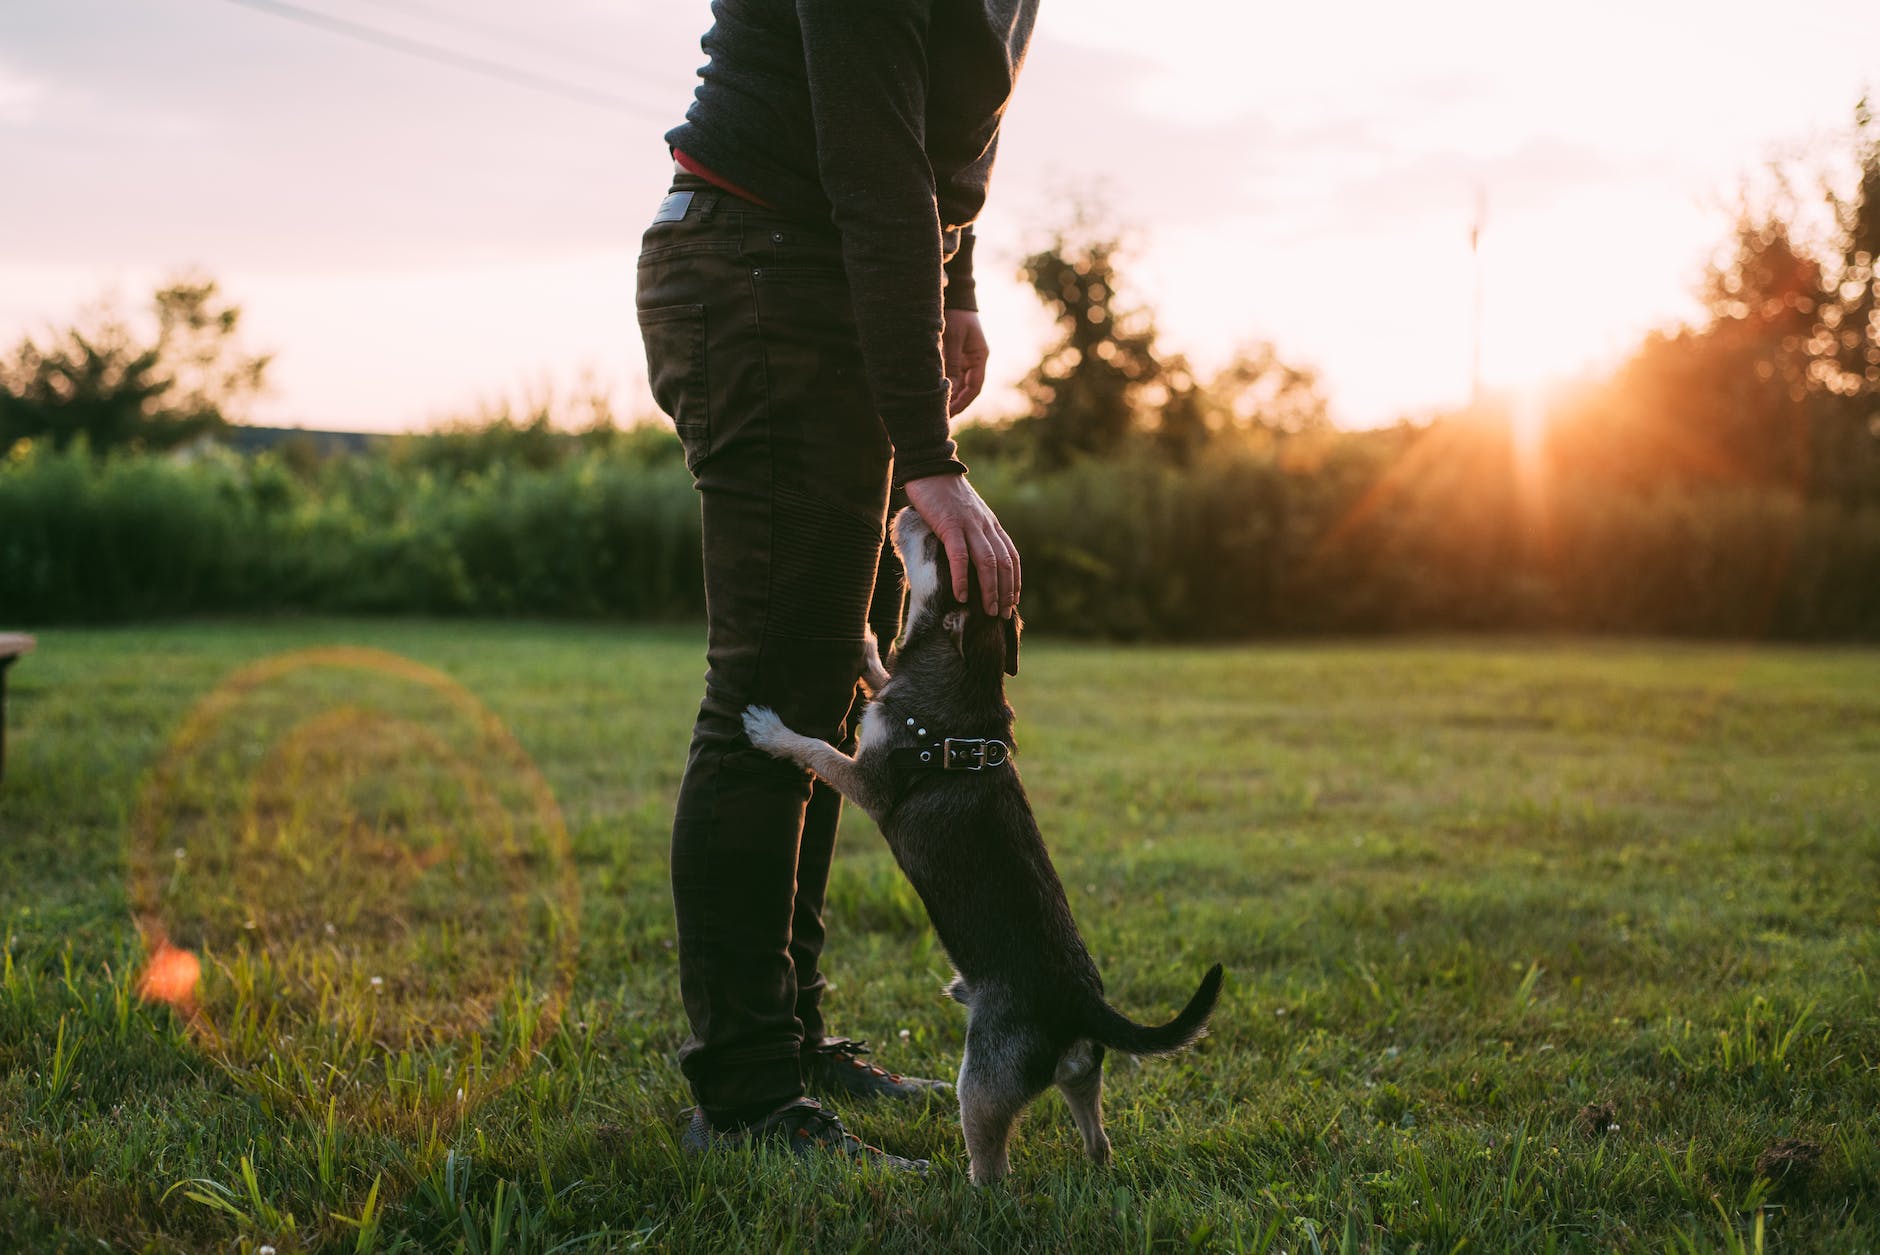 photo of person standing beside dog on grass field